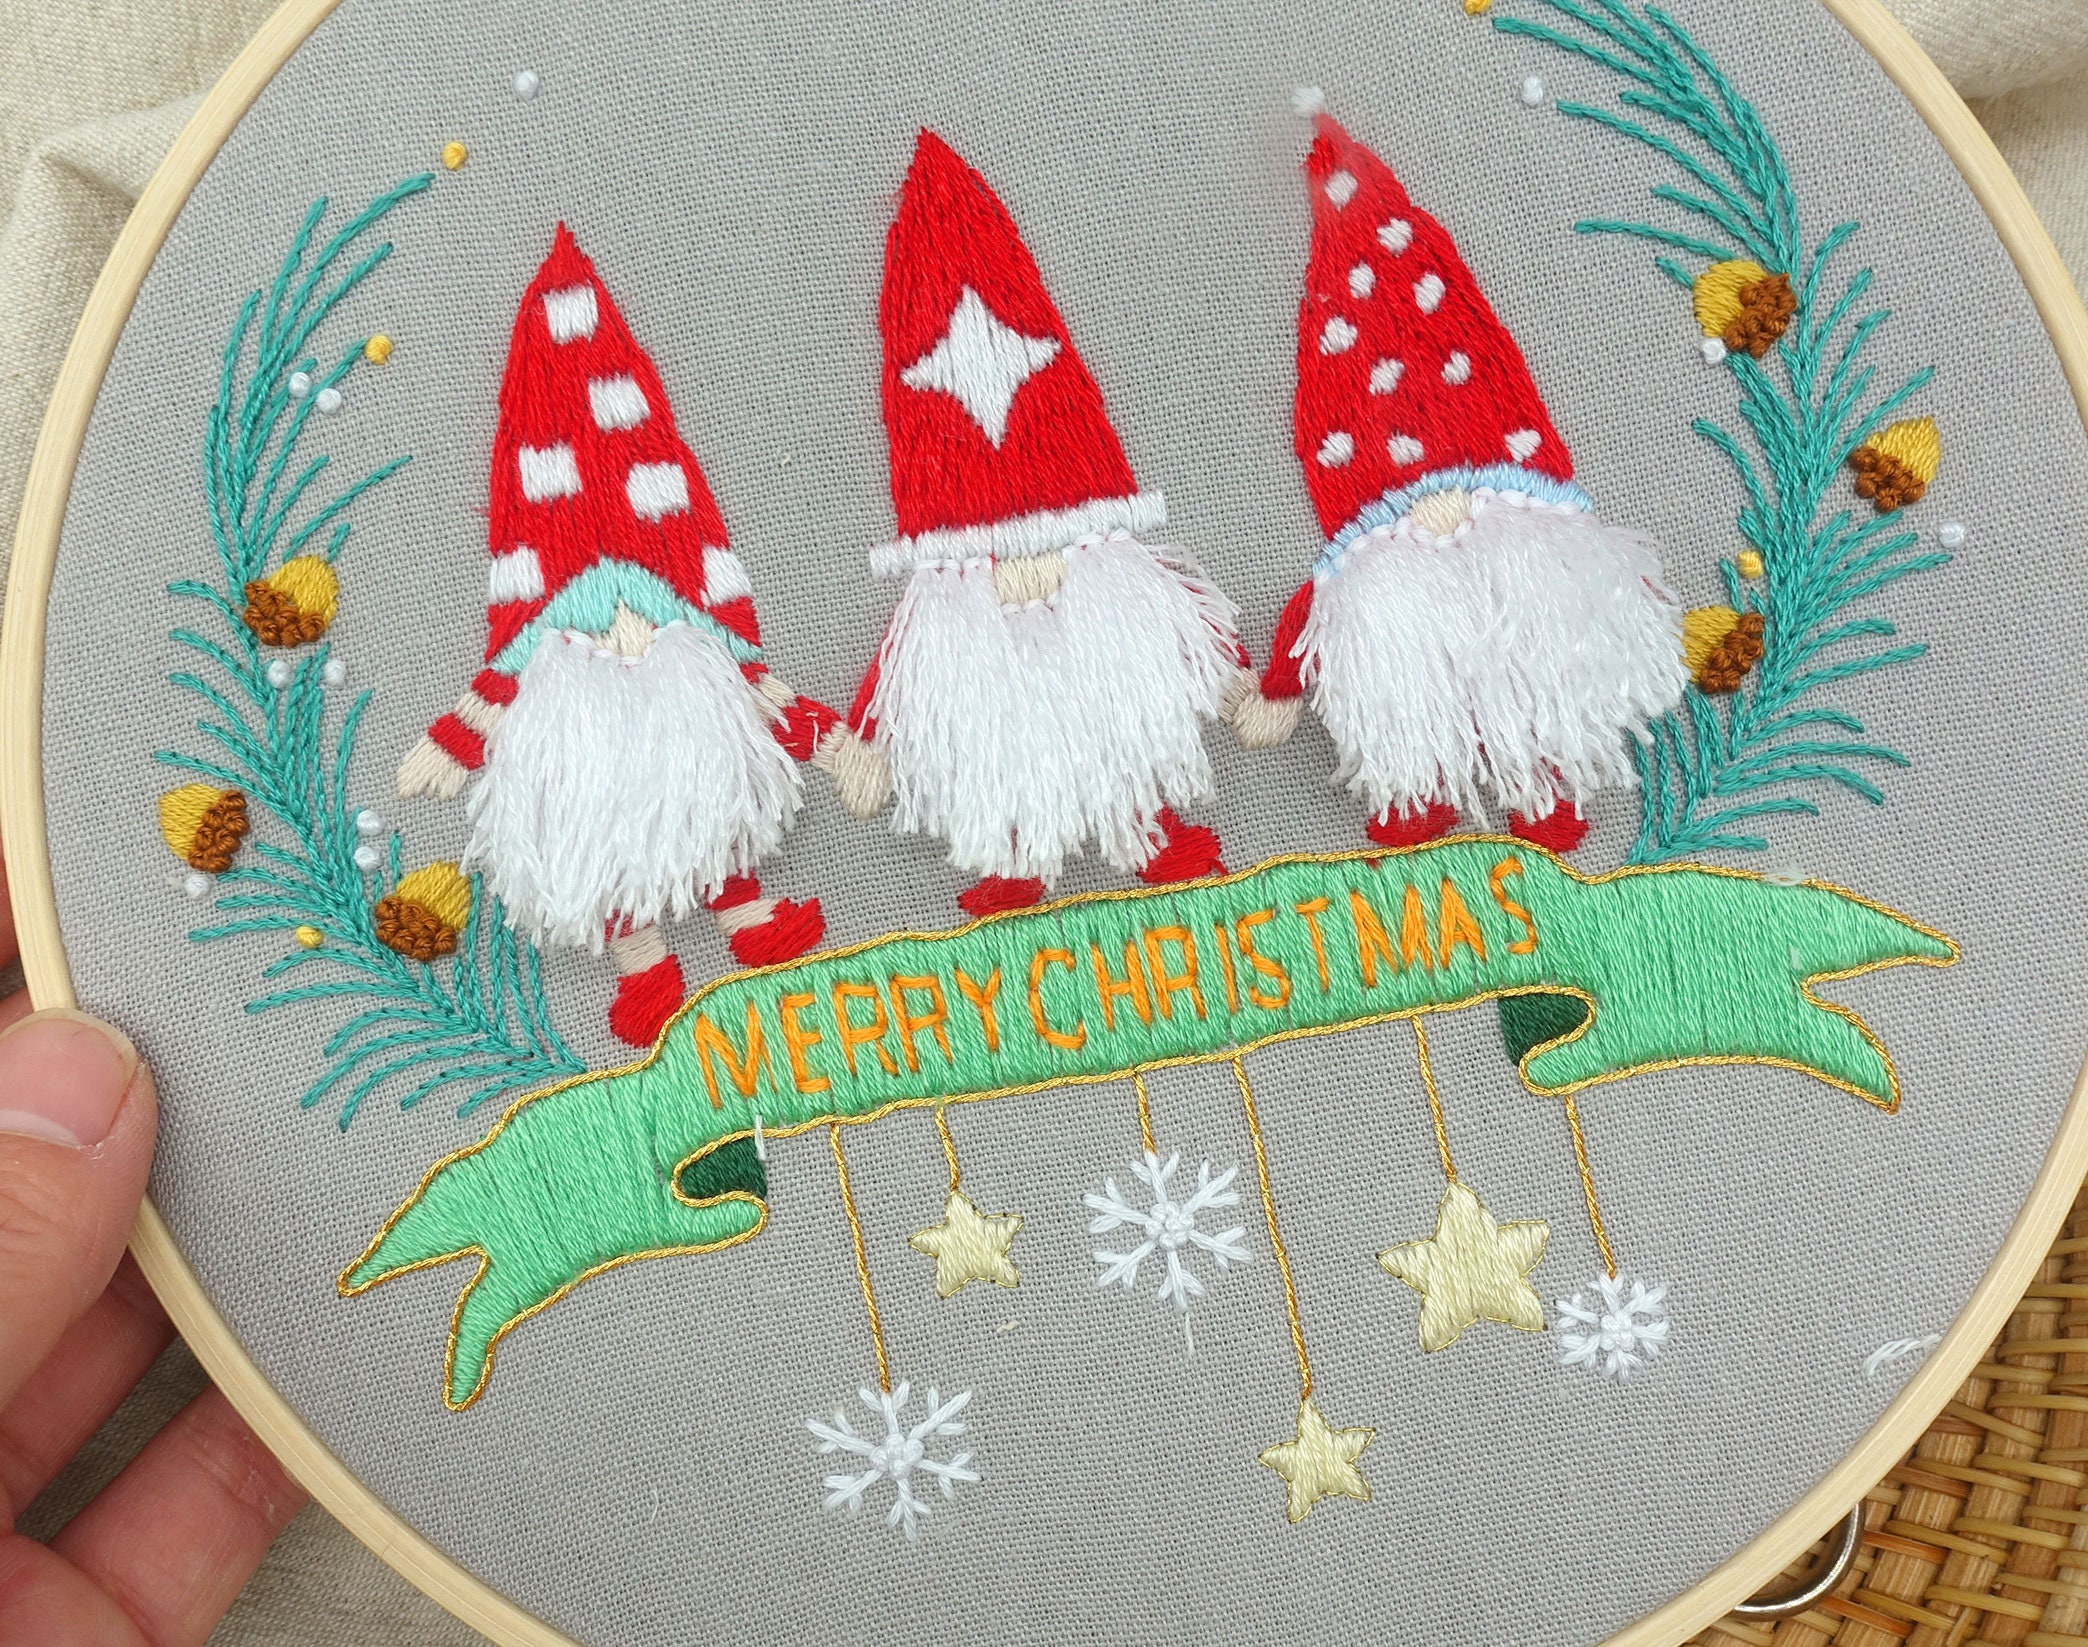 1set Christmas Embroidery Kit, Original Diy Handmade Embroidery Material  Pack Merry Christmas Santa Claus Gift Cross-stitch Kit 20cm Bamboo Q-snap  Included